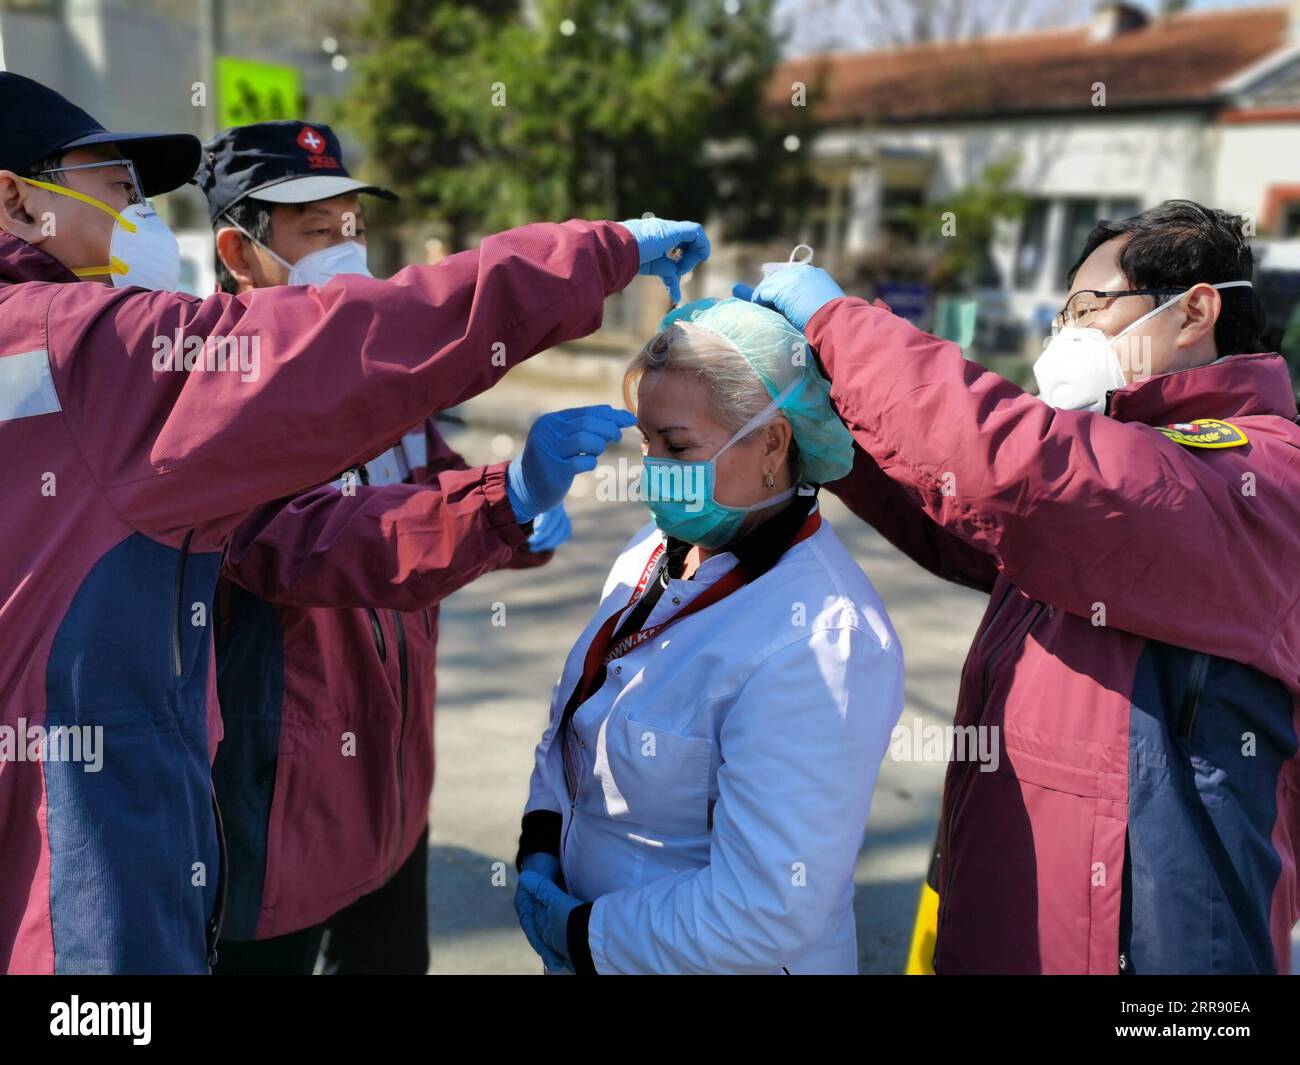 210521 -- BEIJING, May 21, 2021  -- Chinese expert medical team members help a local doctor changing her mask in Belgrade, Serbia, on April 4, 2020. TO GO WITH HEADLINES OF MAY 21, 2021  CHINA-XI JINPING-GLOBAL HEALTH SUMMIT-CLOSING IMMUNIZATION GAPCN xinhua PUBLICATIONxNOTxINxCHN Stock Photo